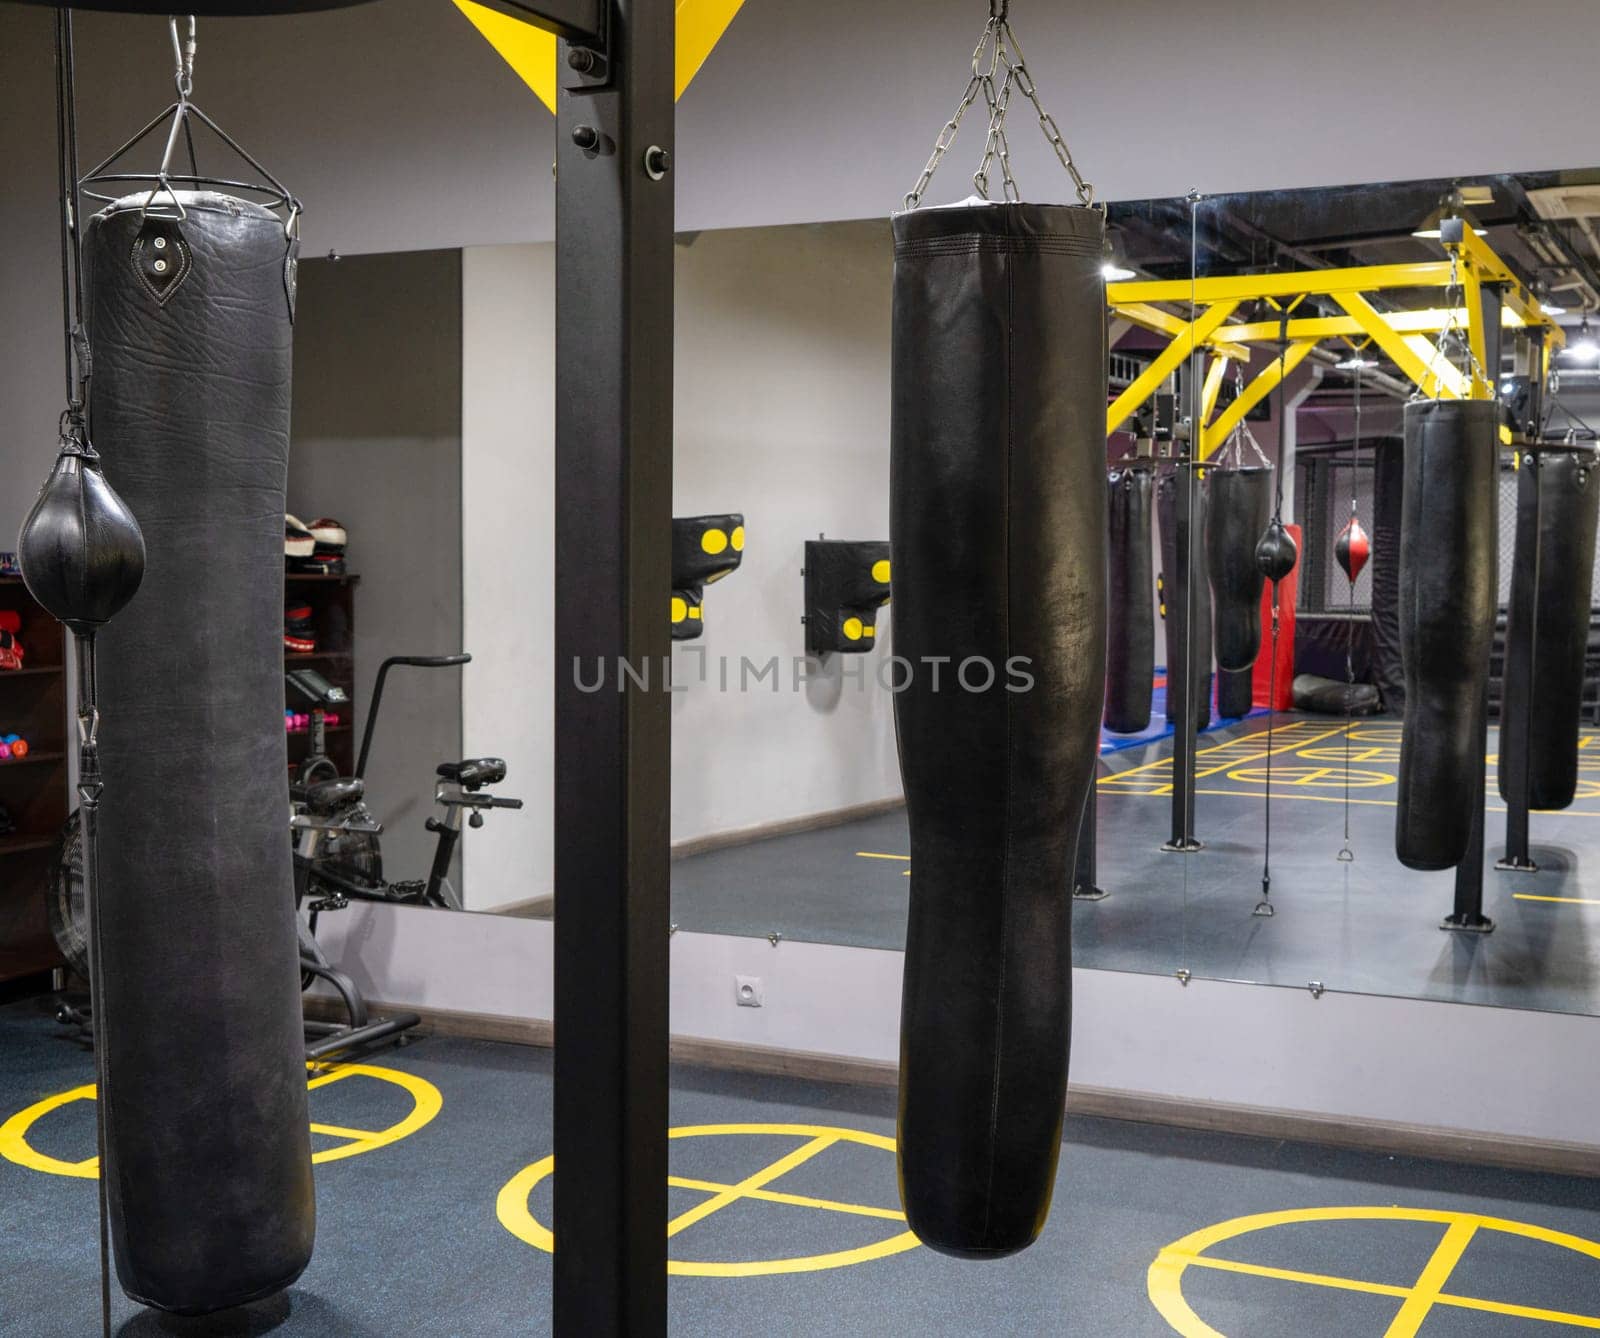 A shot of boxing bags in the sports complex